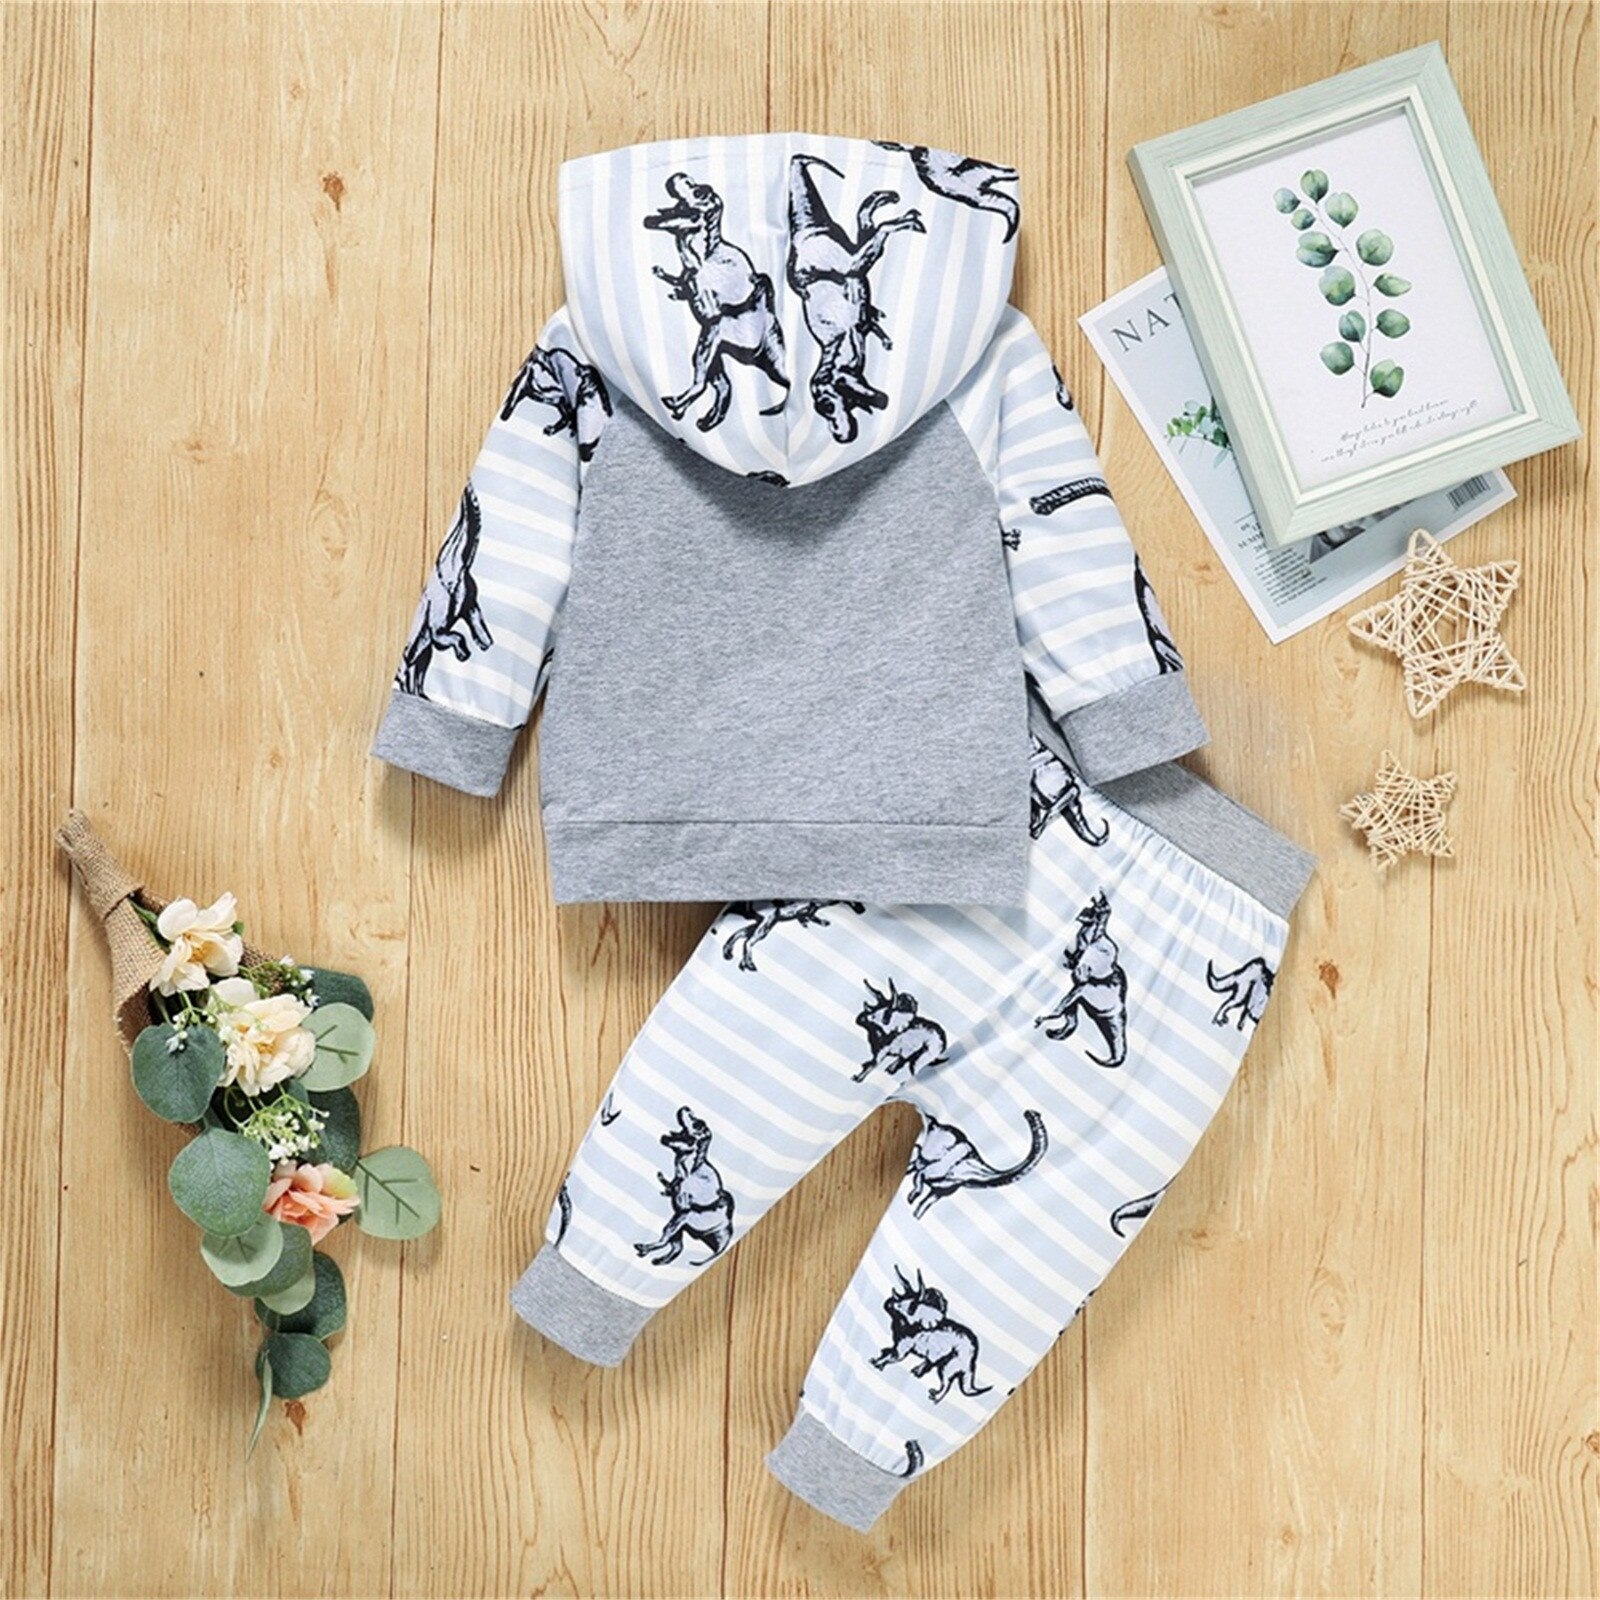 Newborn-Baby-Boy-Clothing-Sets-Baby-Winter-Outfits-Dinosaur-Print-Hooded-Sweater-Pants-Tracksuit-Child-Boy-1